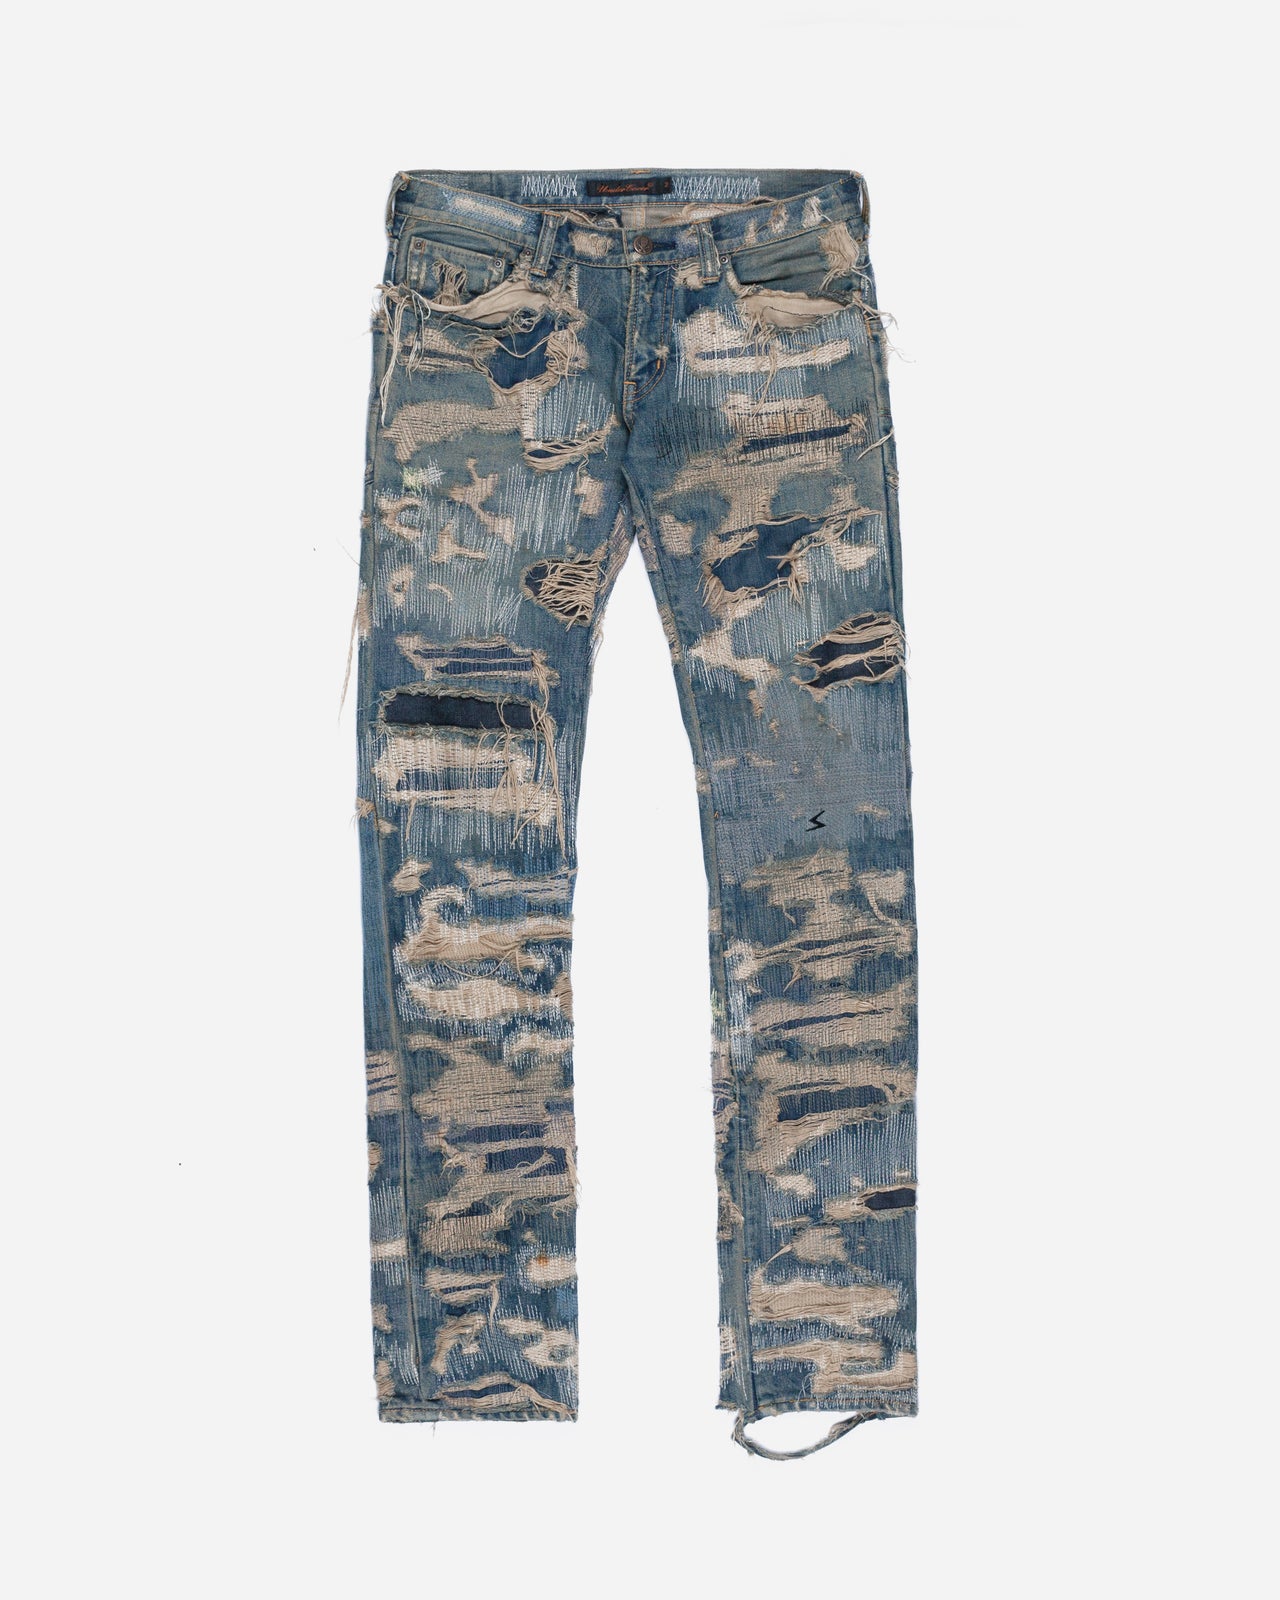 Undercover Blue 85 Jeans - AW05 “Arts And Crafts”